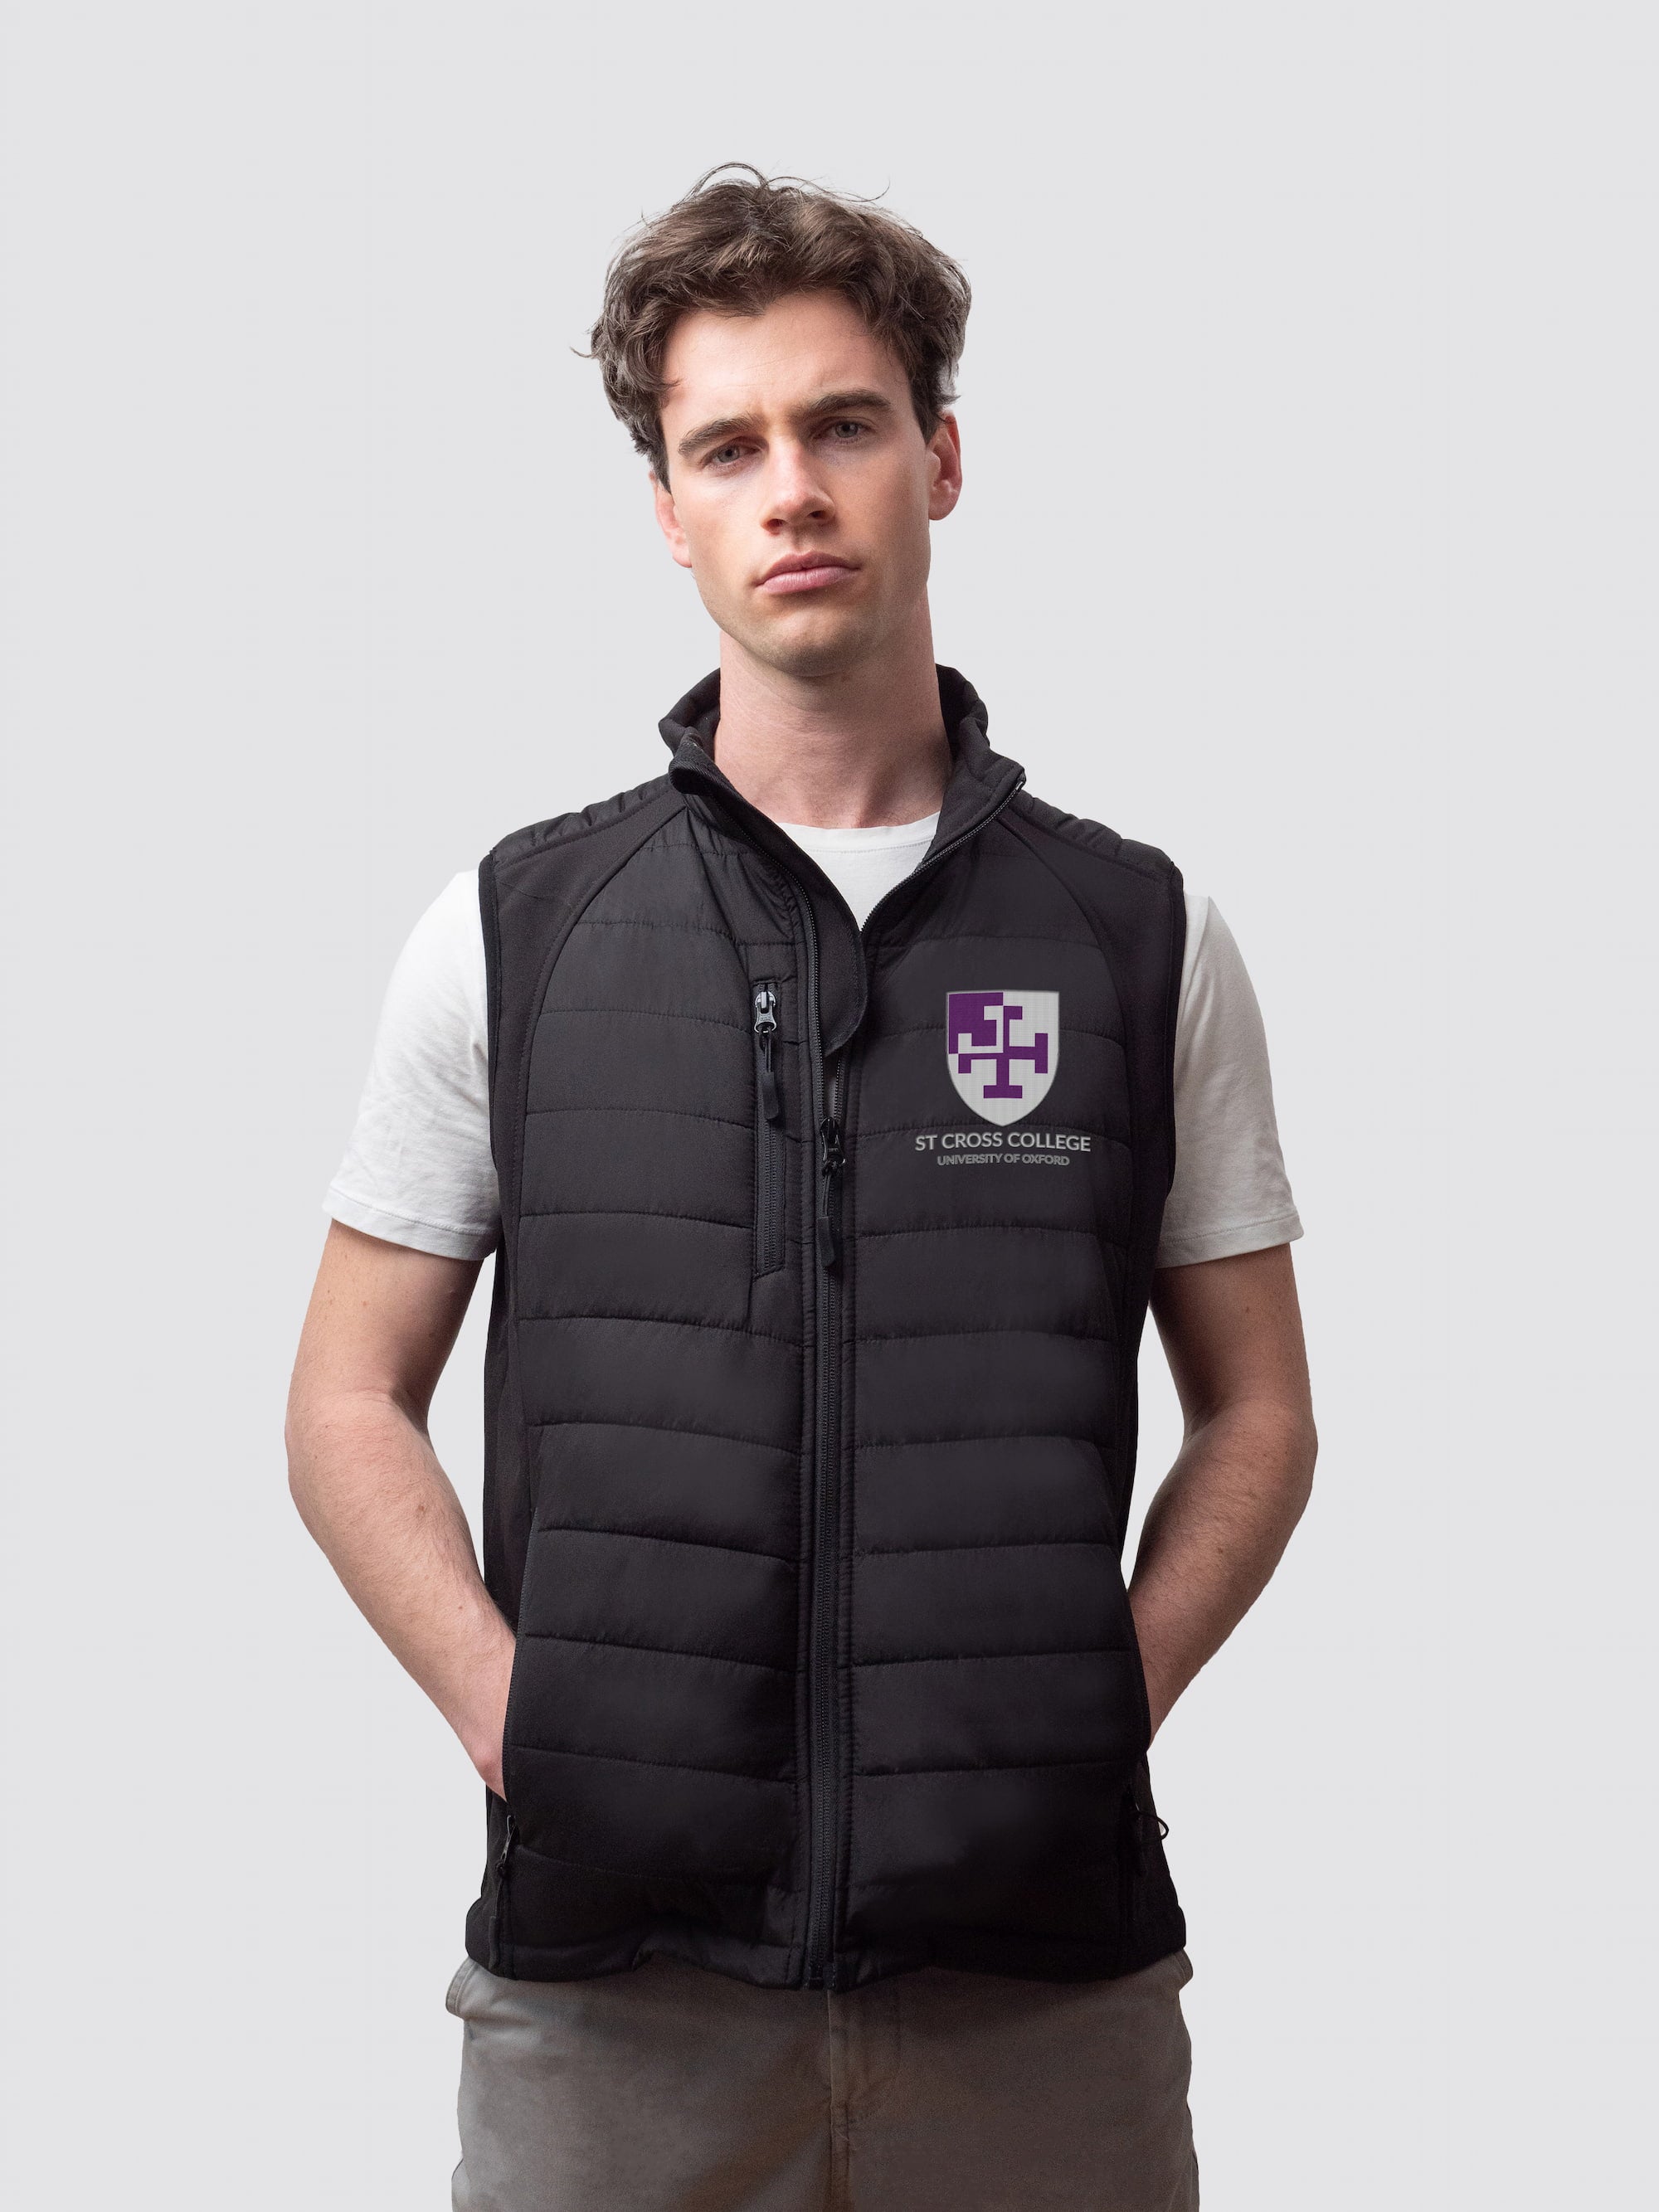 Oxford University gilet, made entirely from premium sustainable yarns